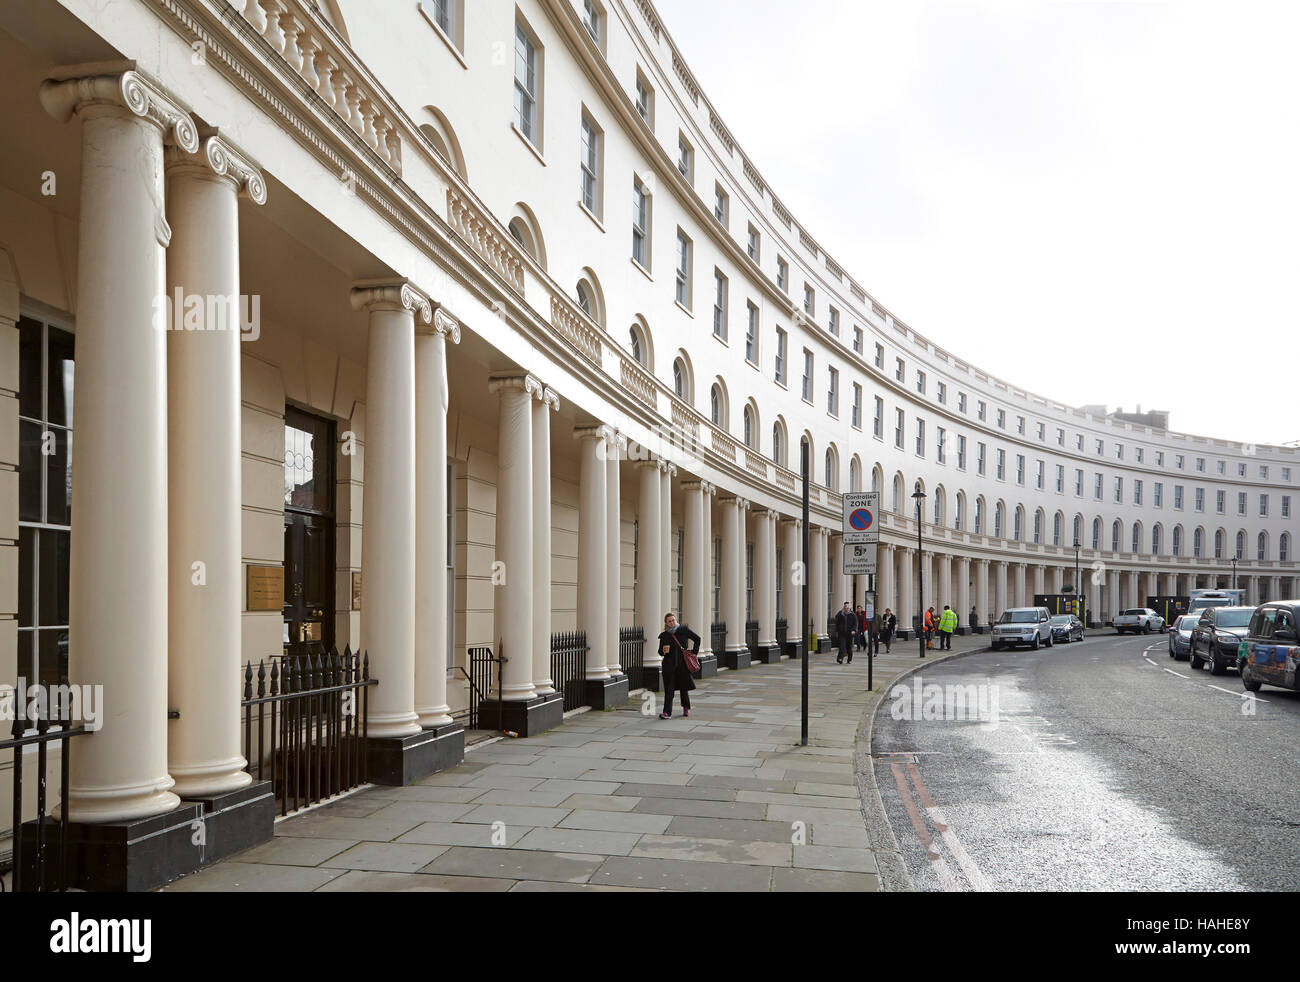 Park Crescent London designed by John Nash. Architectural Stock, Various, United Kingdom. Architect: n/a, 2016. Stock Photo